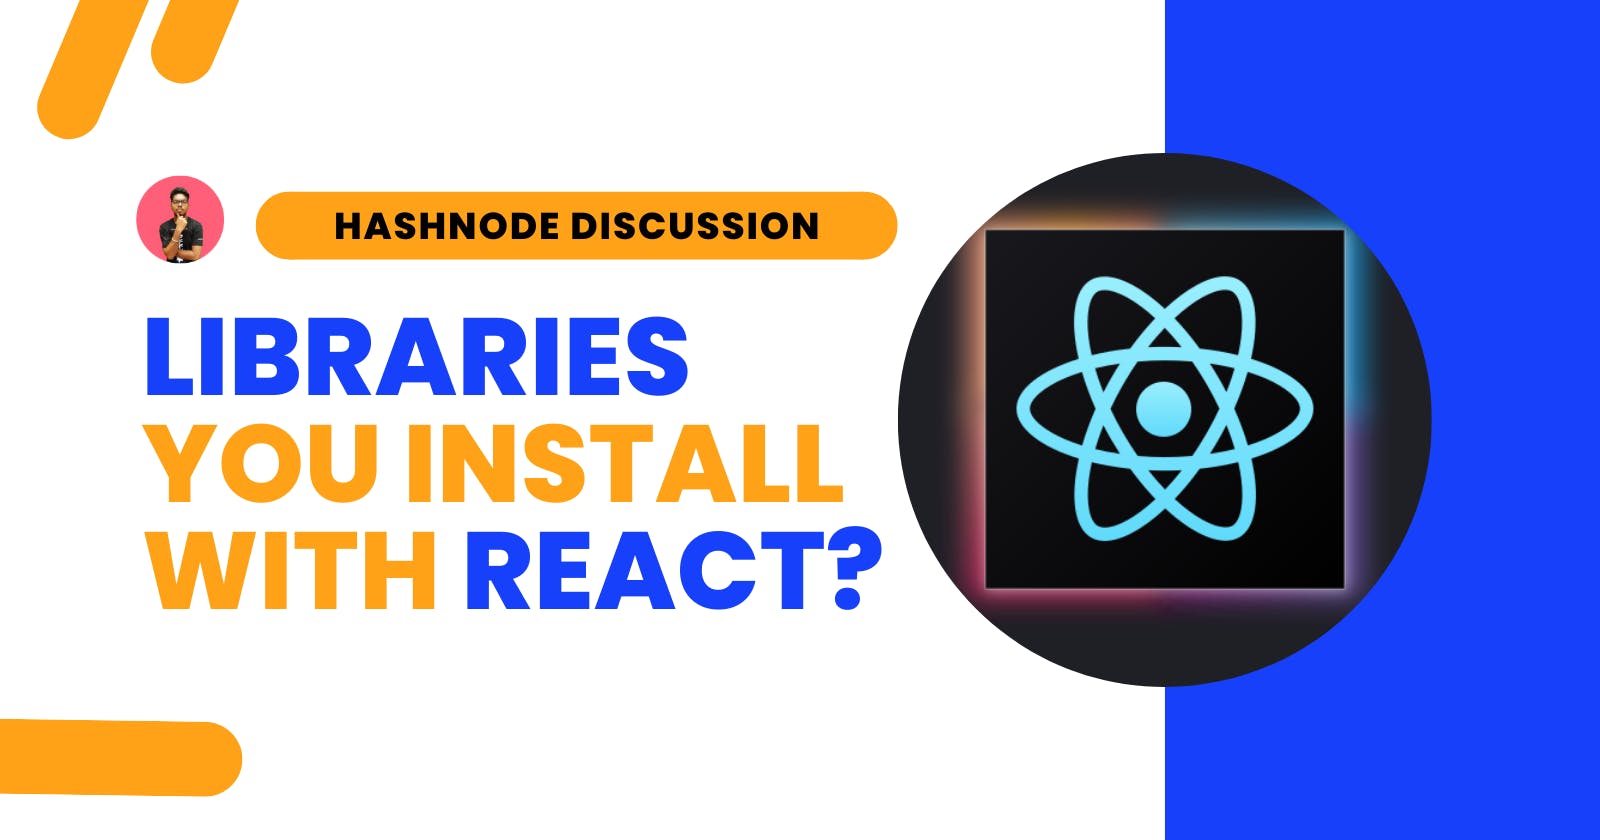 Which other libraries do you install with react?